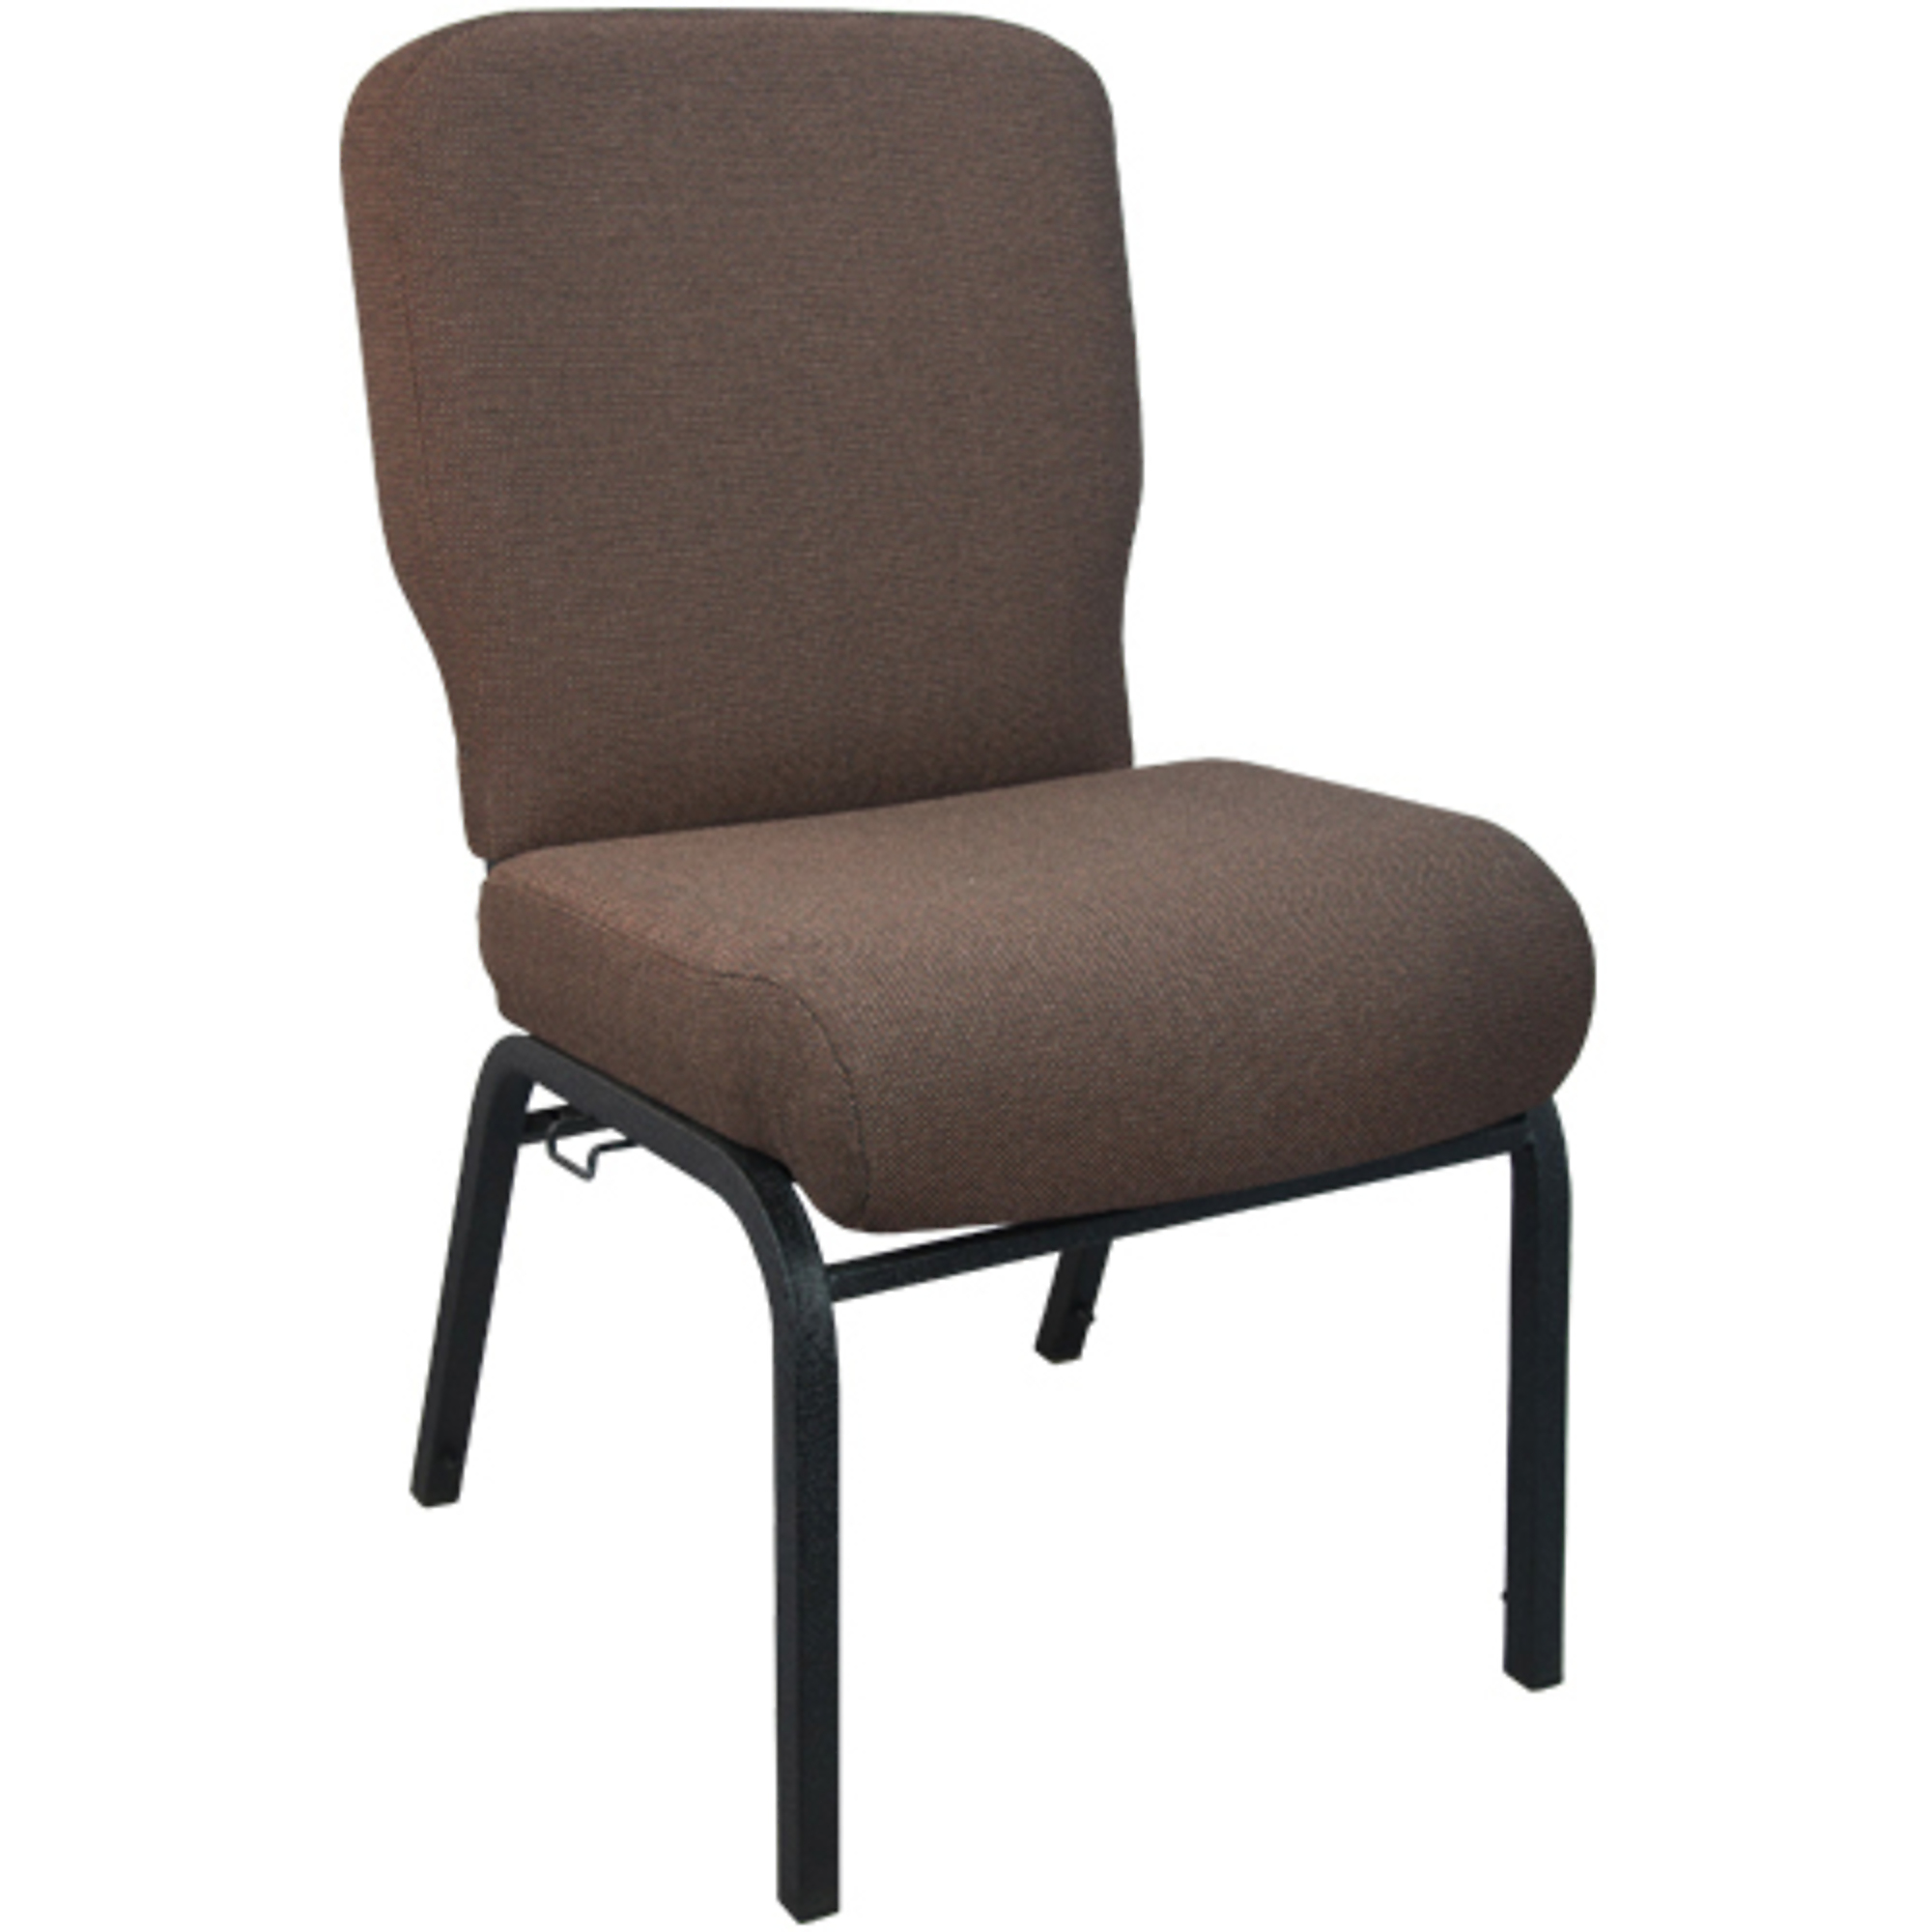 Flash Furniture, Signature Elite Java Church Chair - 20Inch Wide, Primary Color Brown, Included (qty.) 1, Model PCRCB106